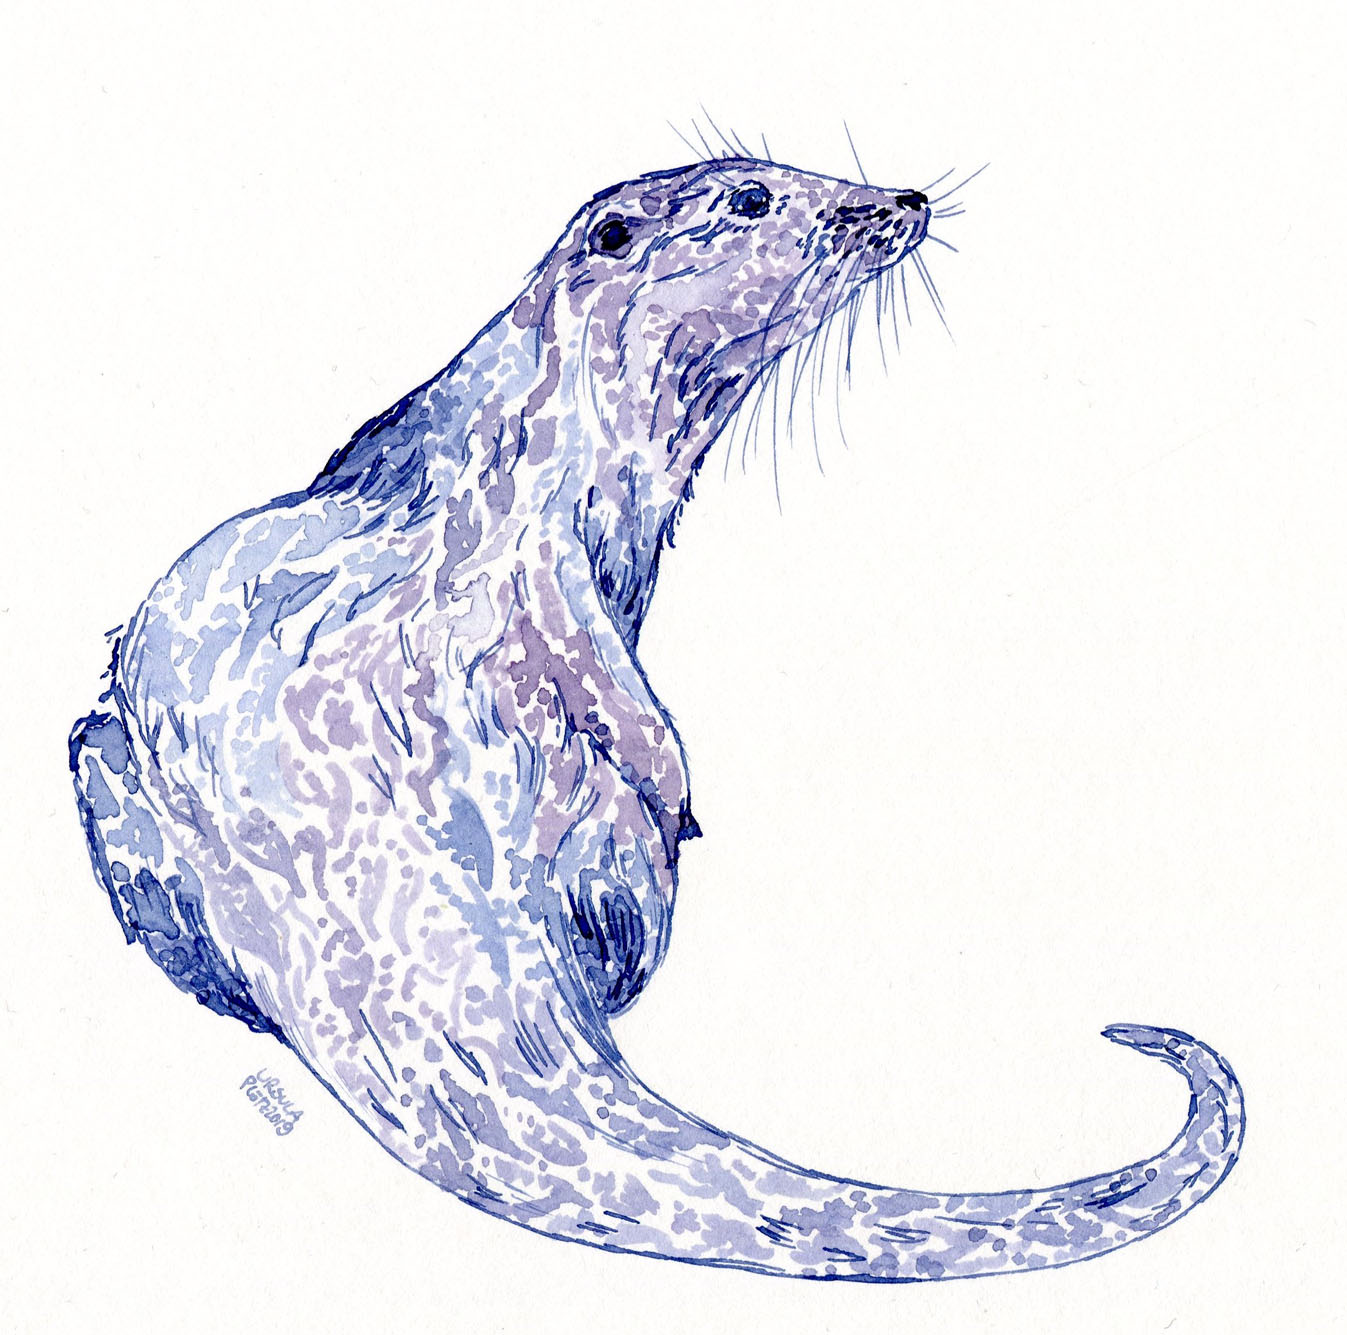 Drawn otter looking to the side in a violet-blueish colour